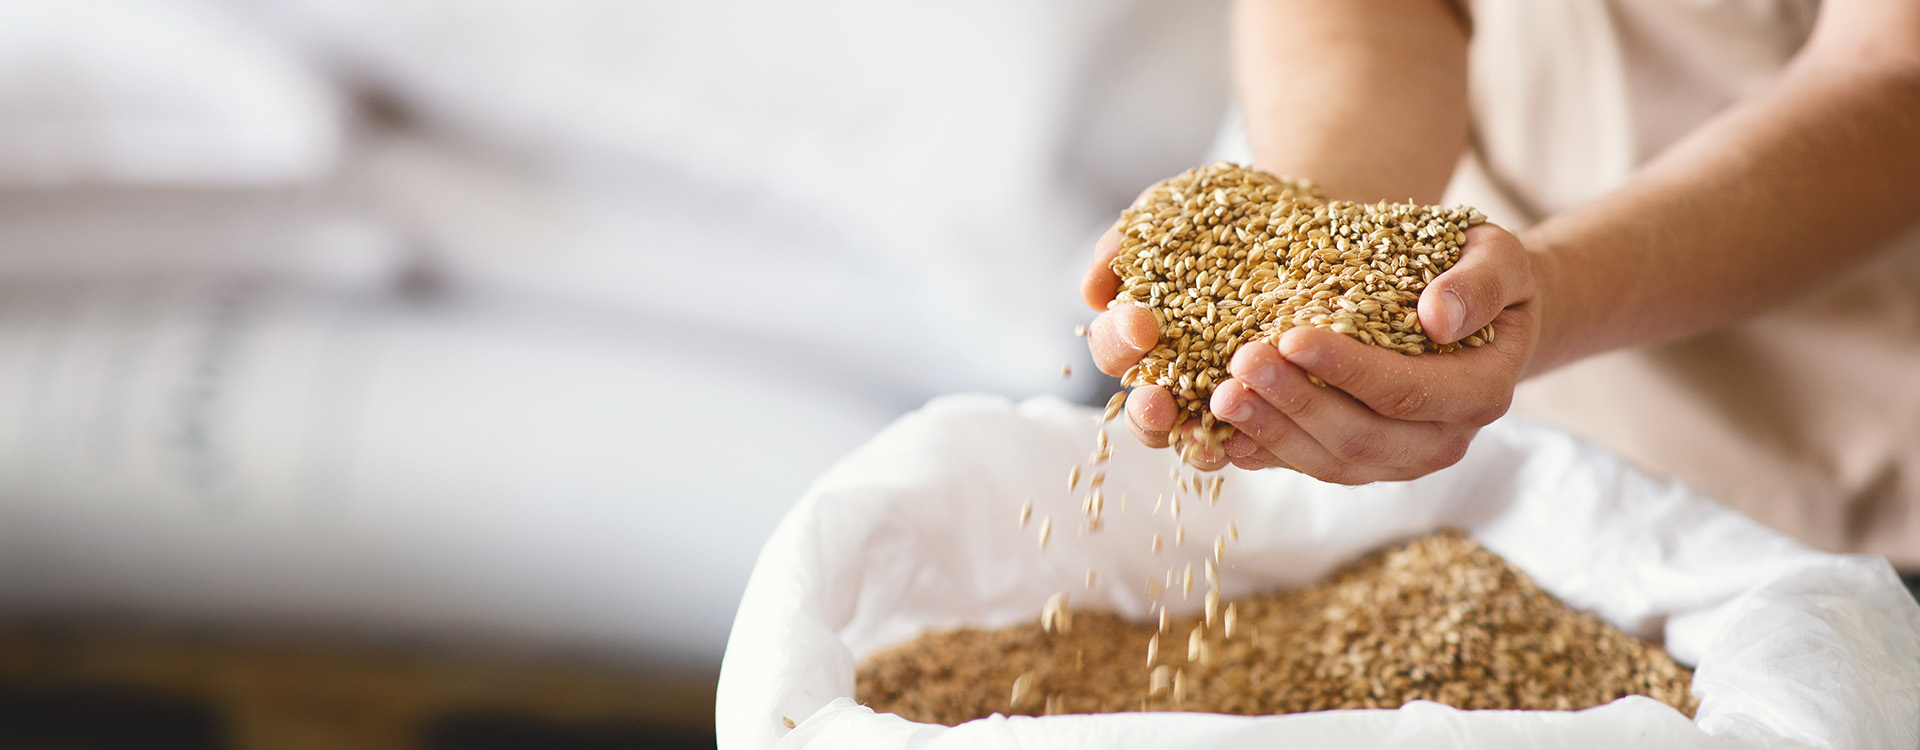 Hands holding quality brewing grains